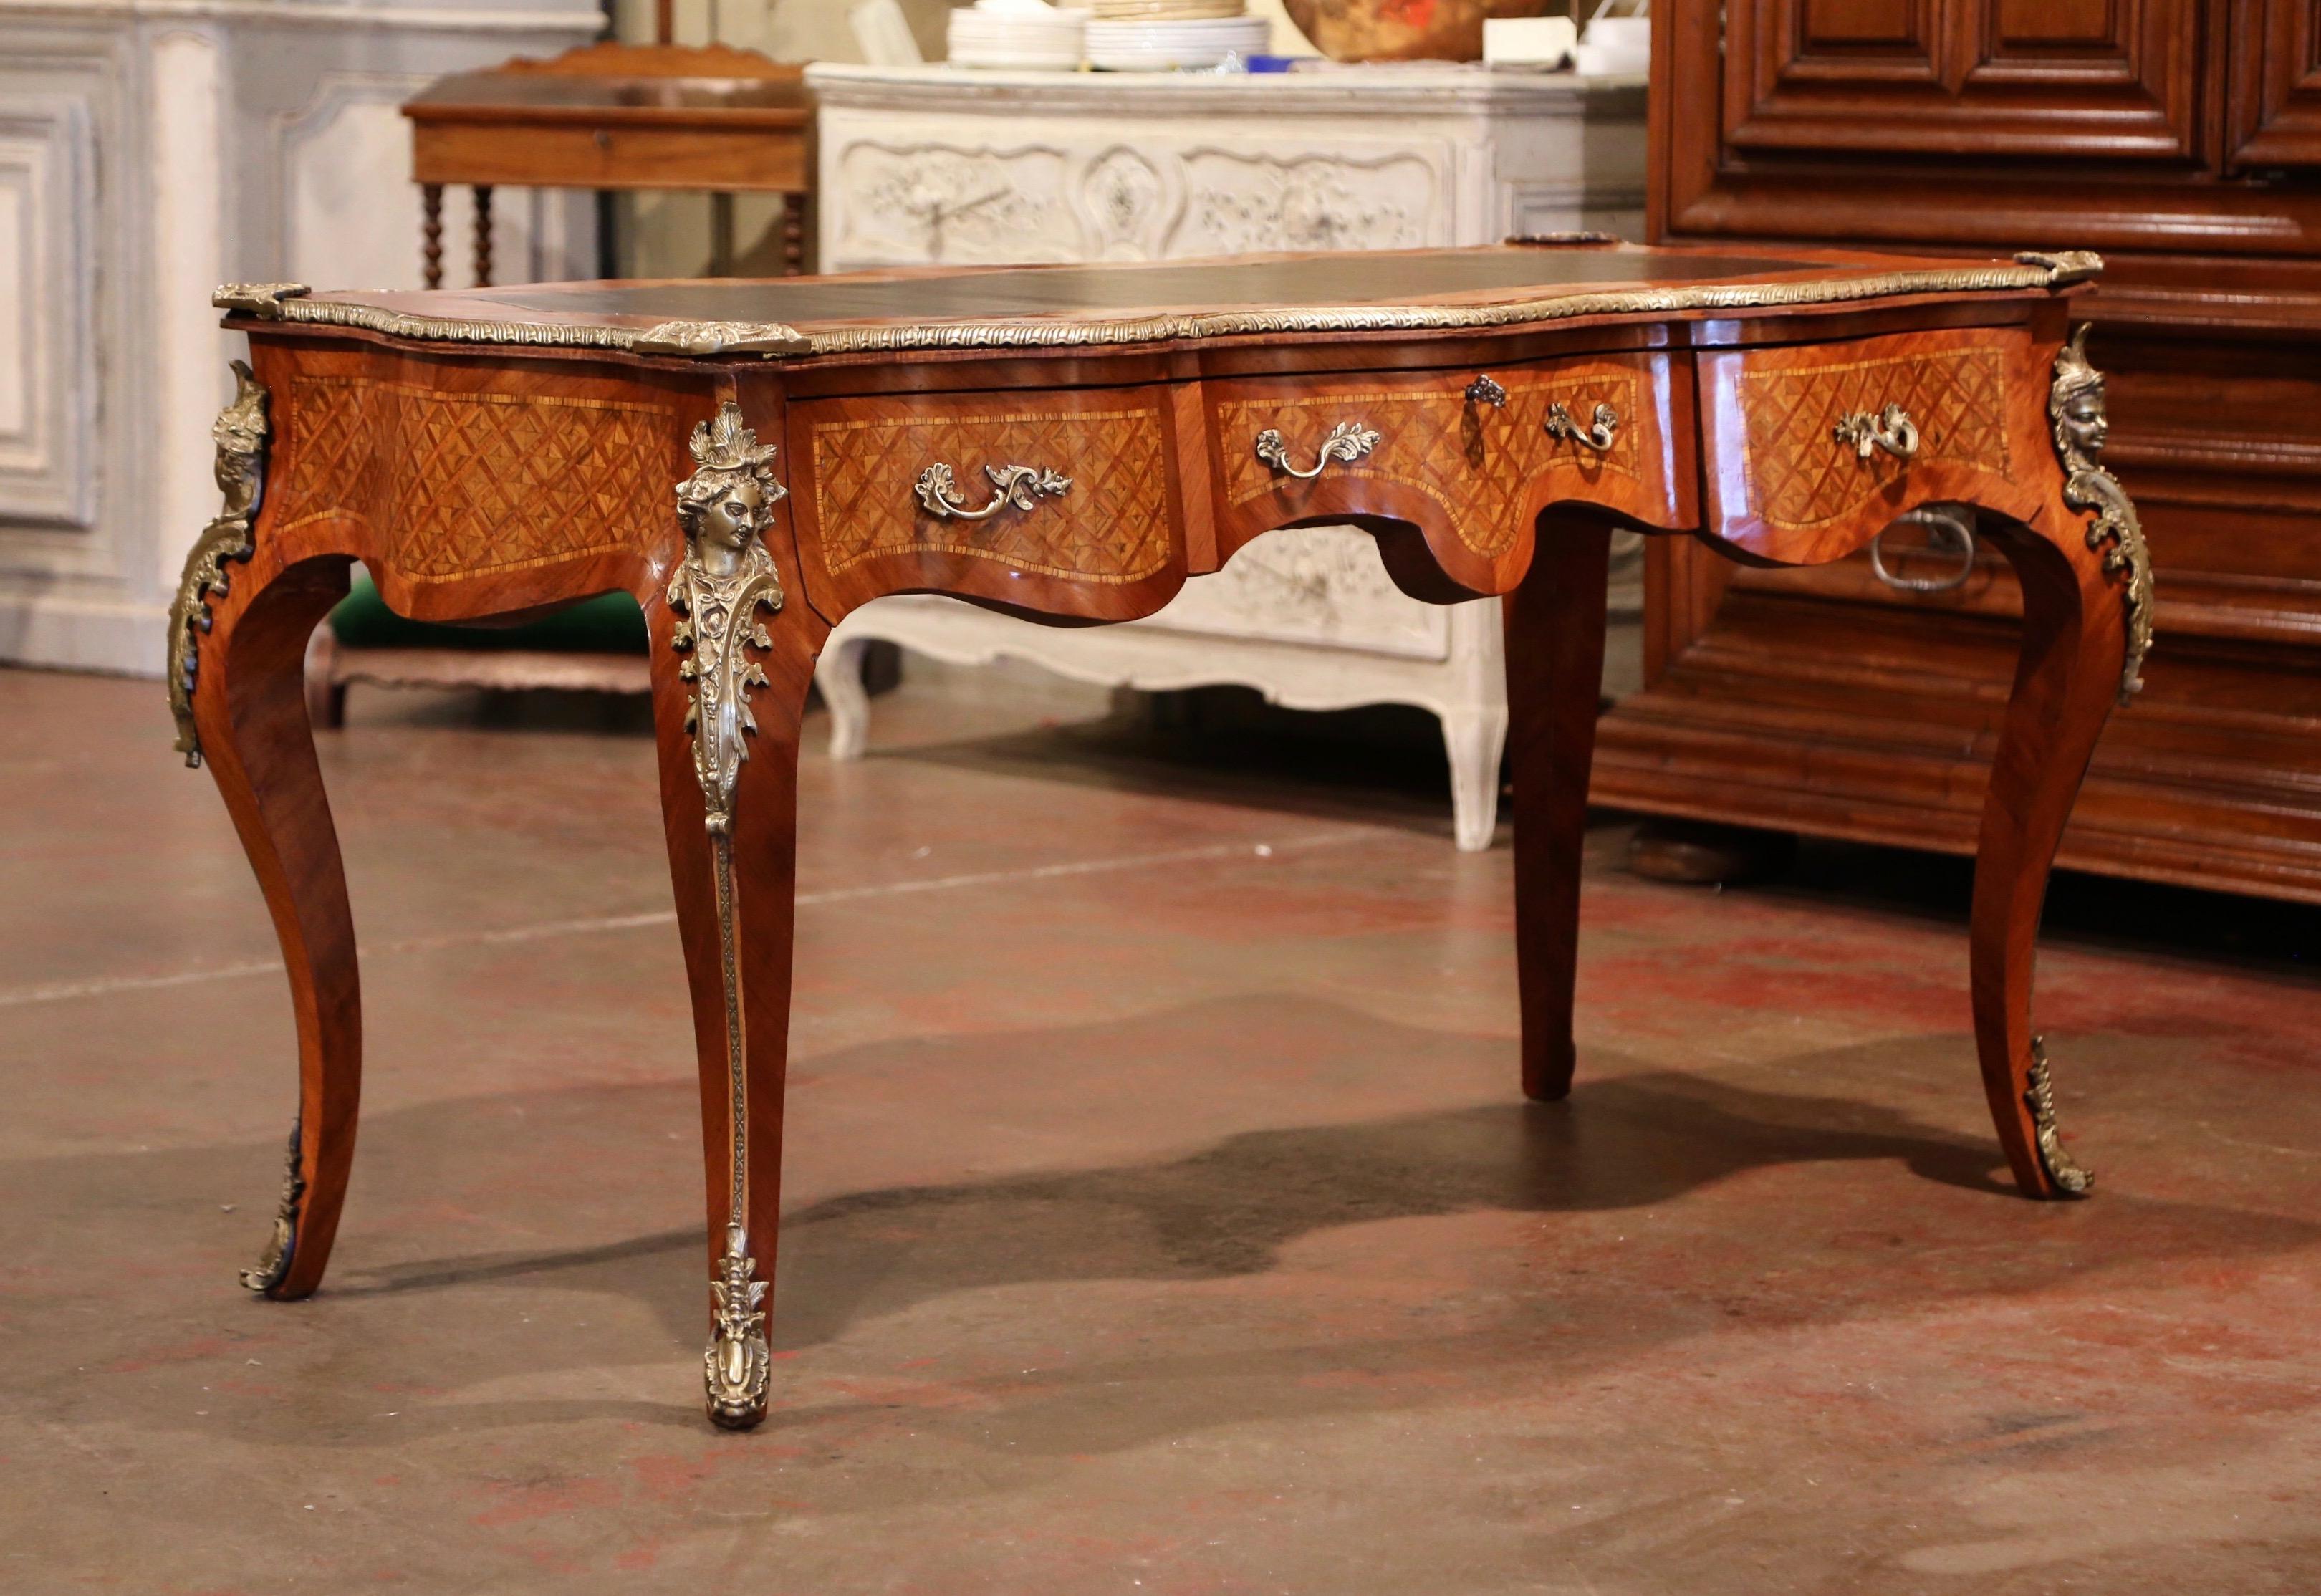 Created in France circa 1920, this elegant antique desk stands on cabriole legs decorated with bronze figural ormulu mounts at the shoulders and ending with sabots over the feet. The writing table features three serpentine drawers across the front